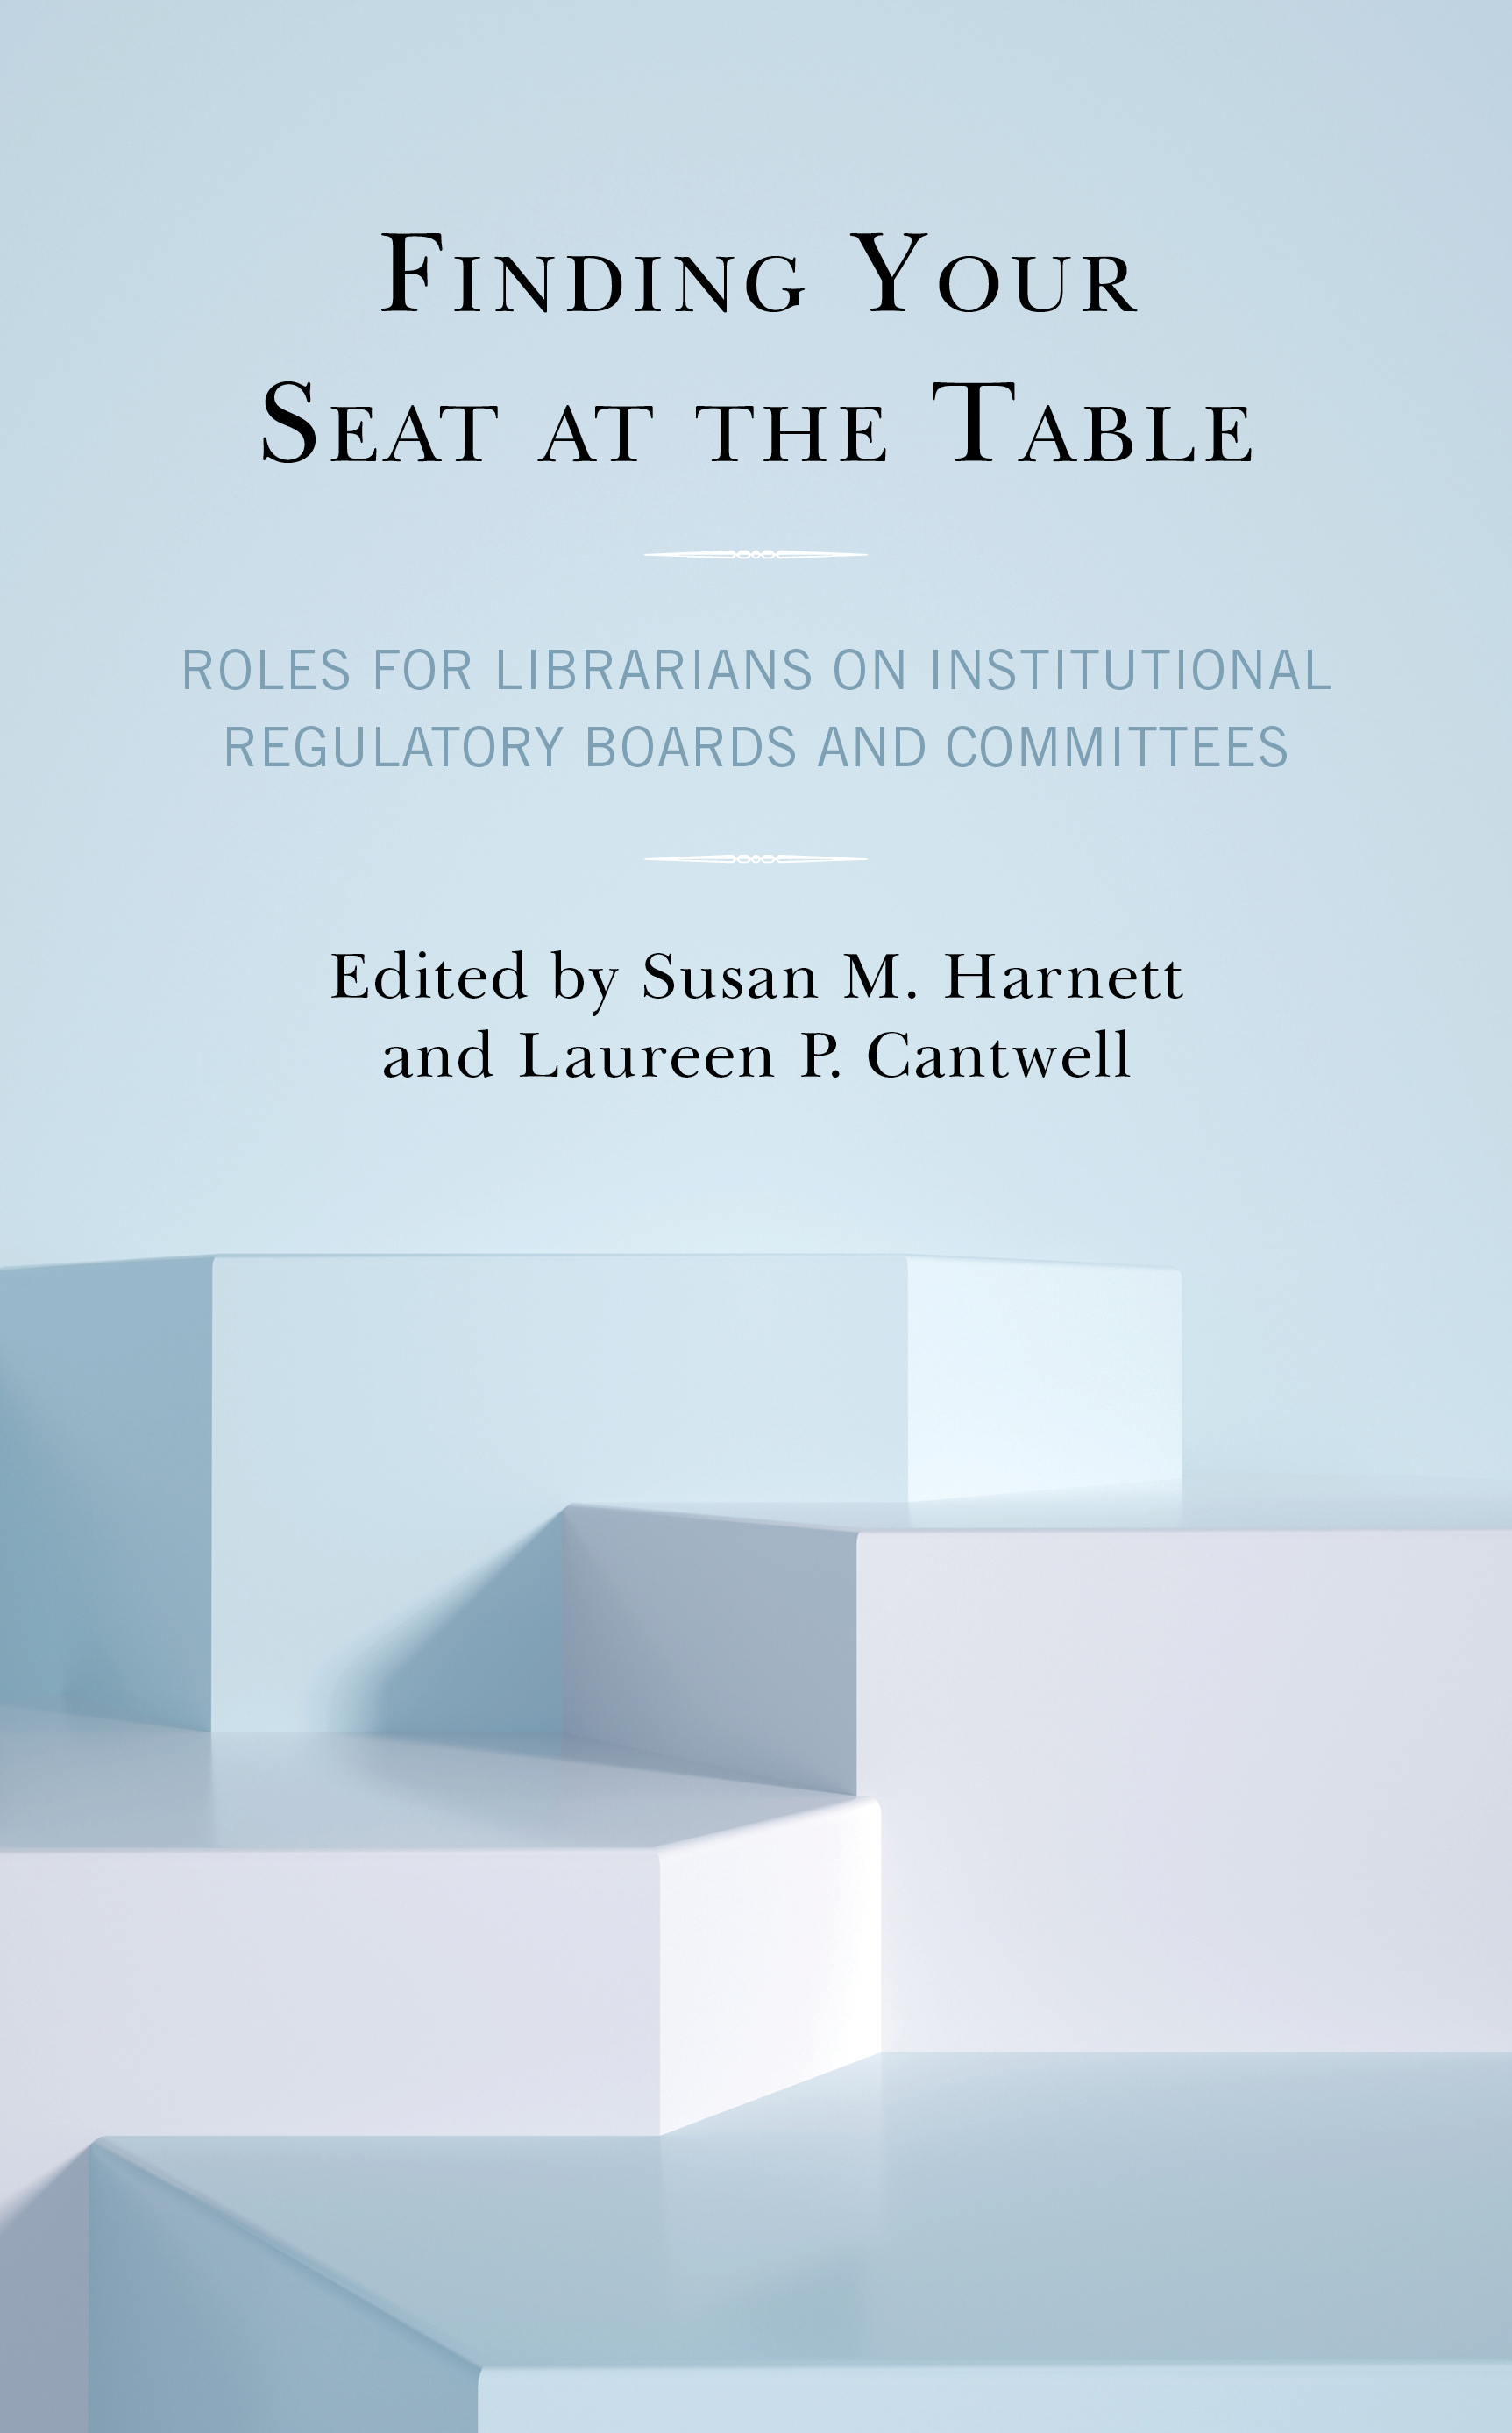 Finding Your Seat at the Table: Roles for Librarians on Institutional Regulatory Boards and Committees